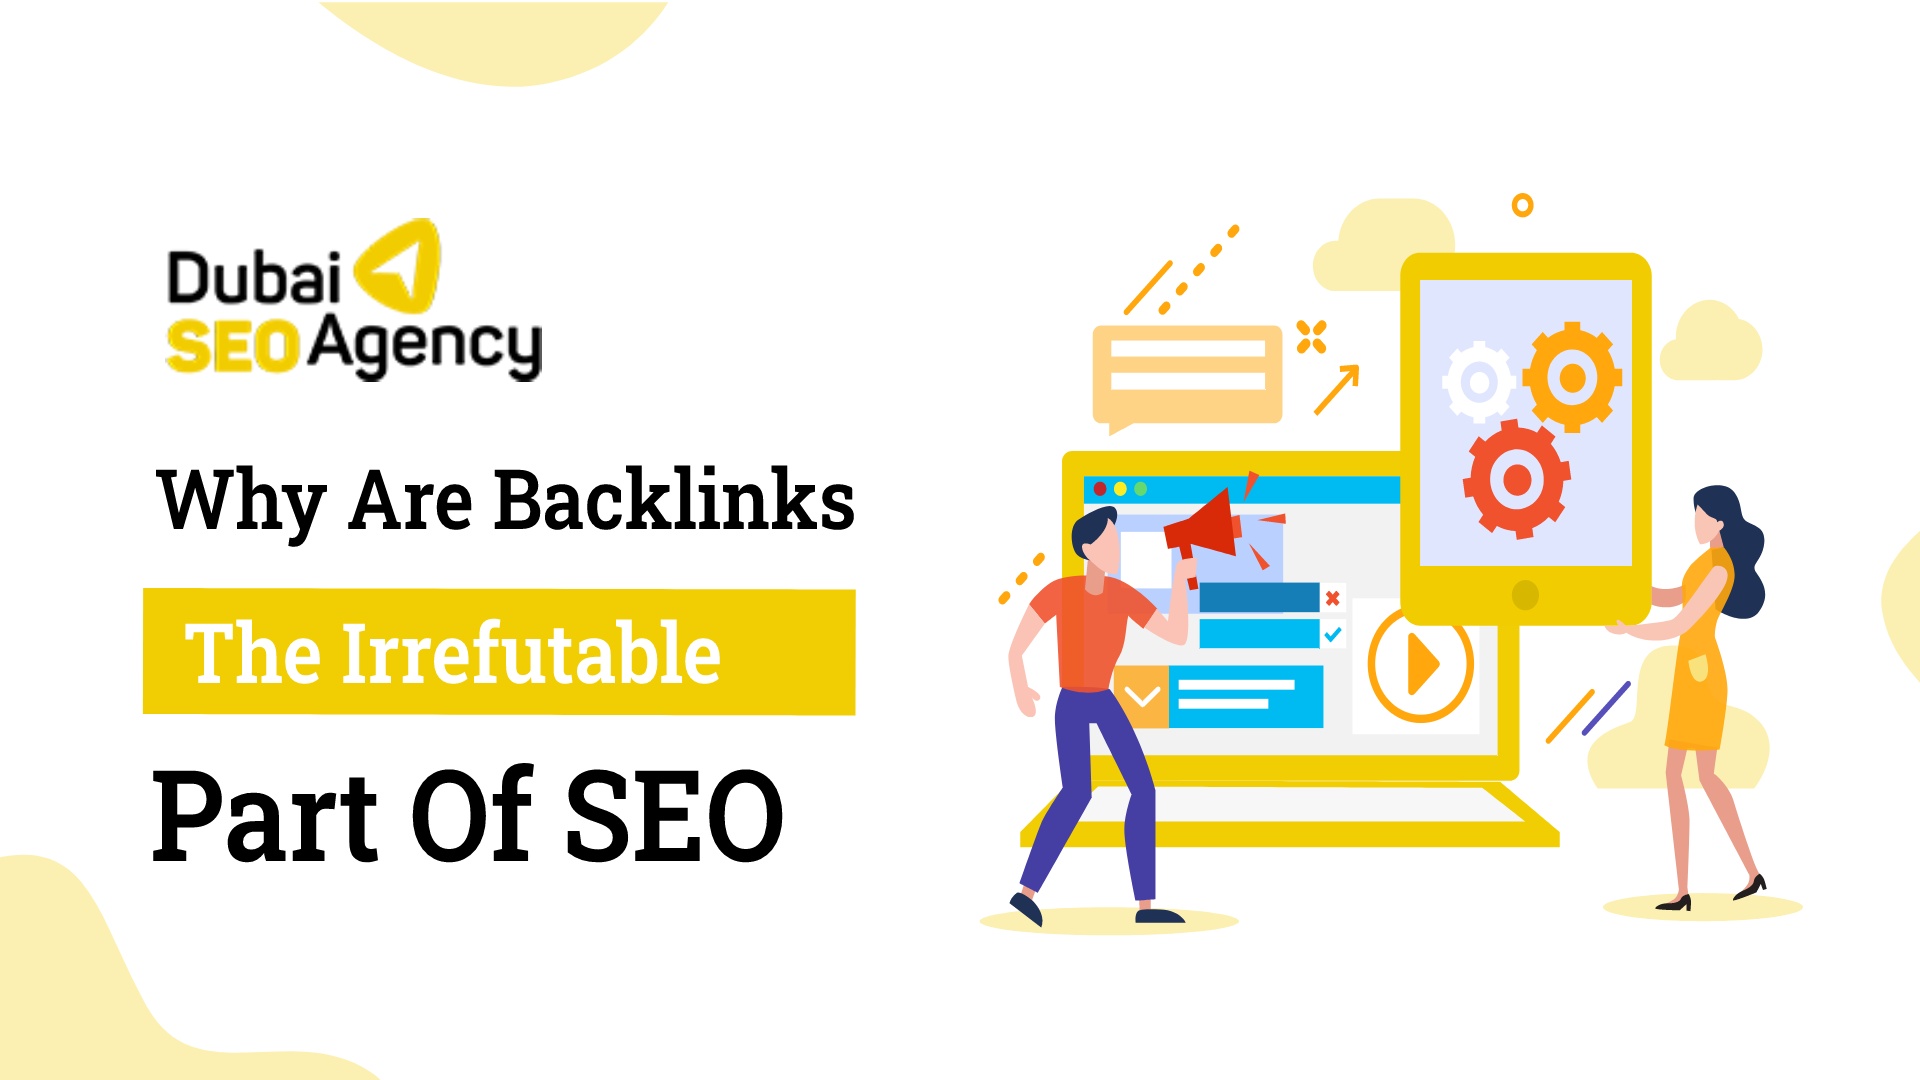 Why Are Backlinks the Irrefutable Part of SEO?